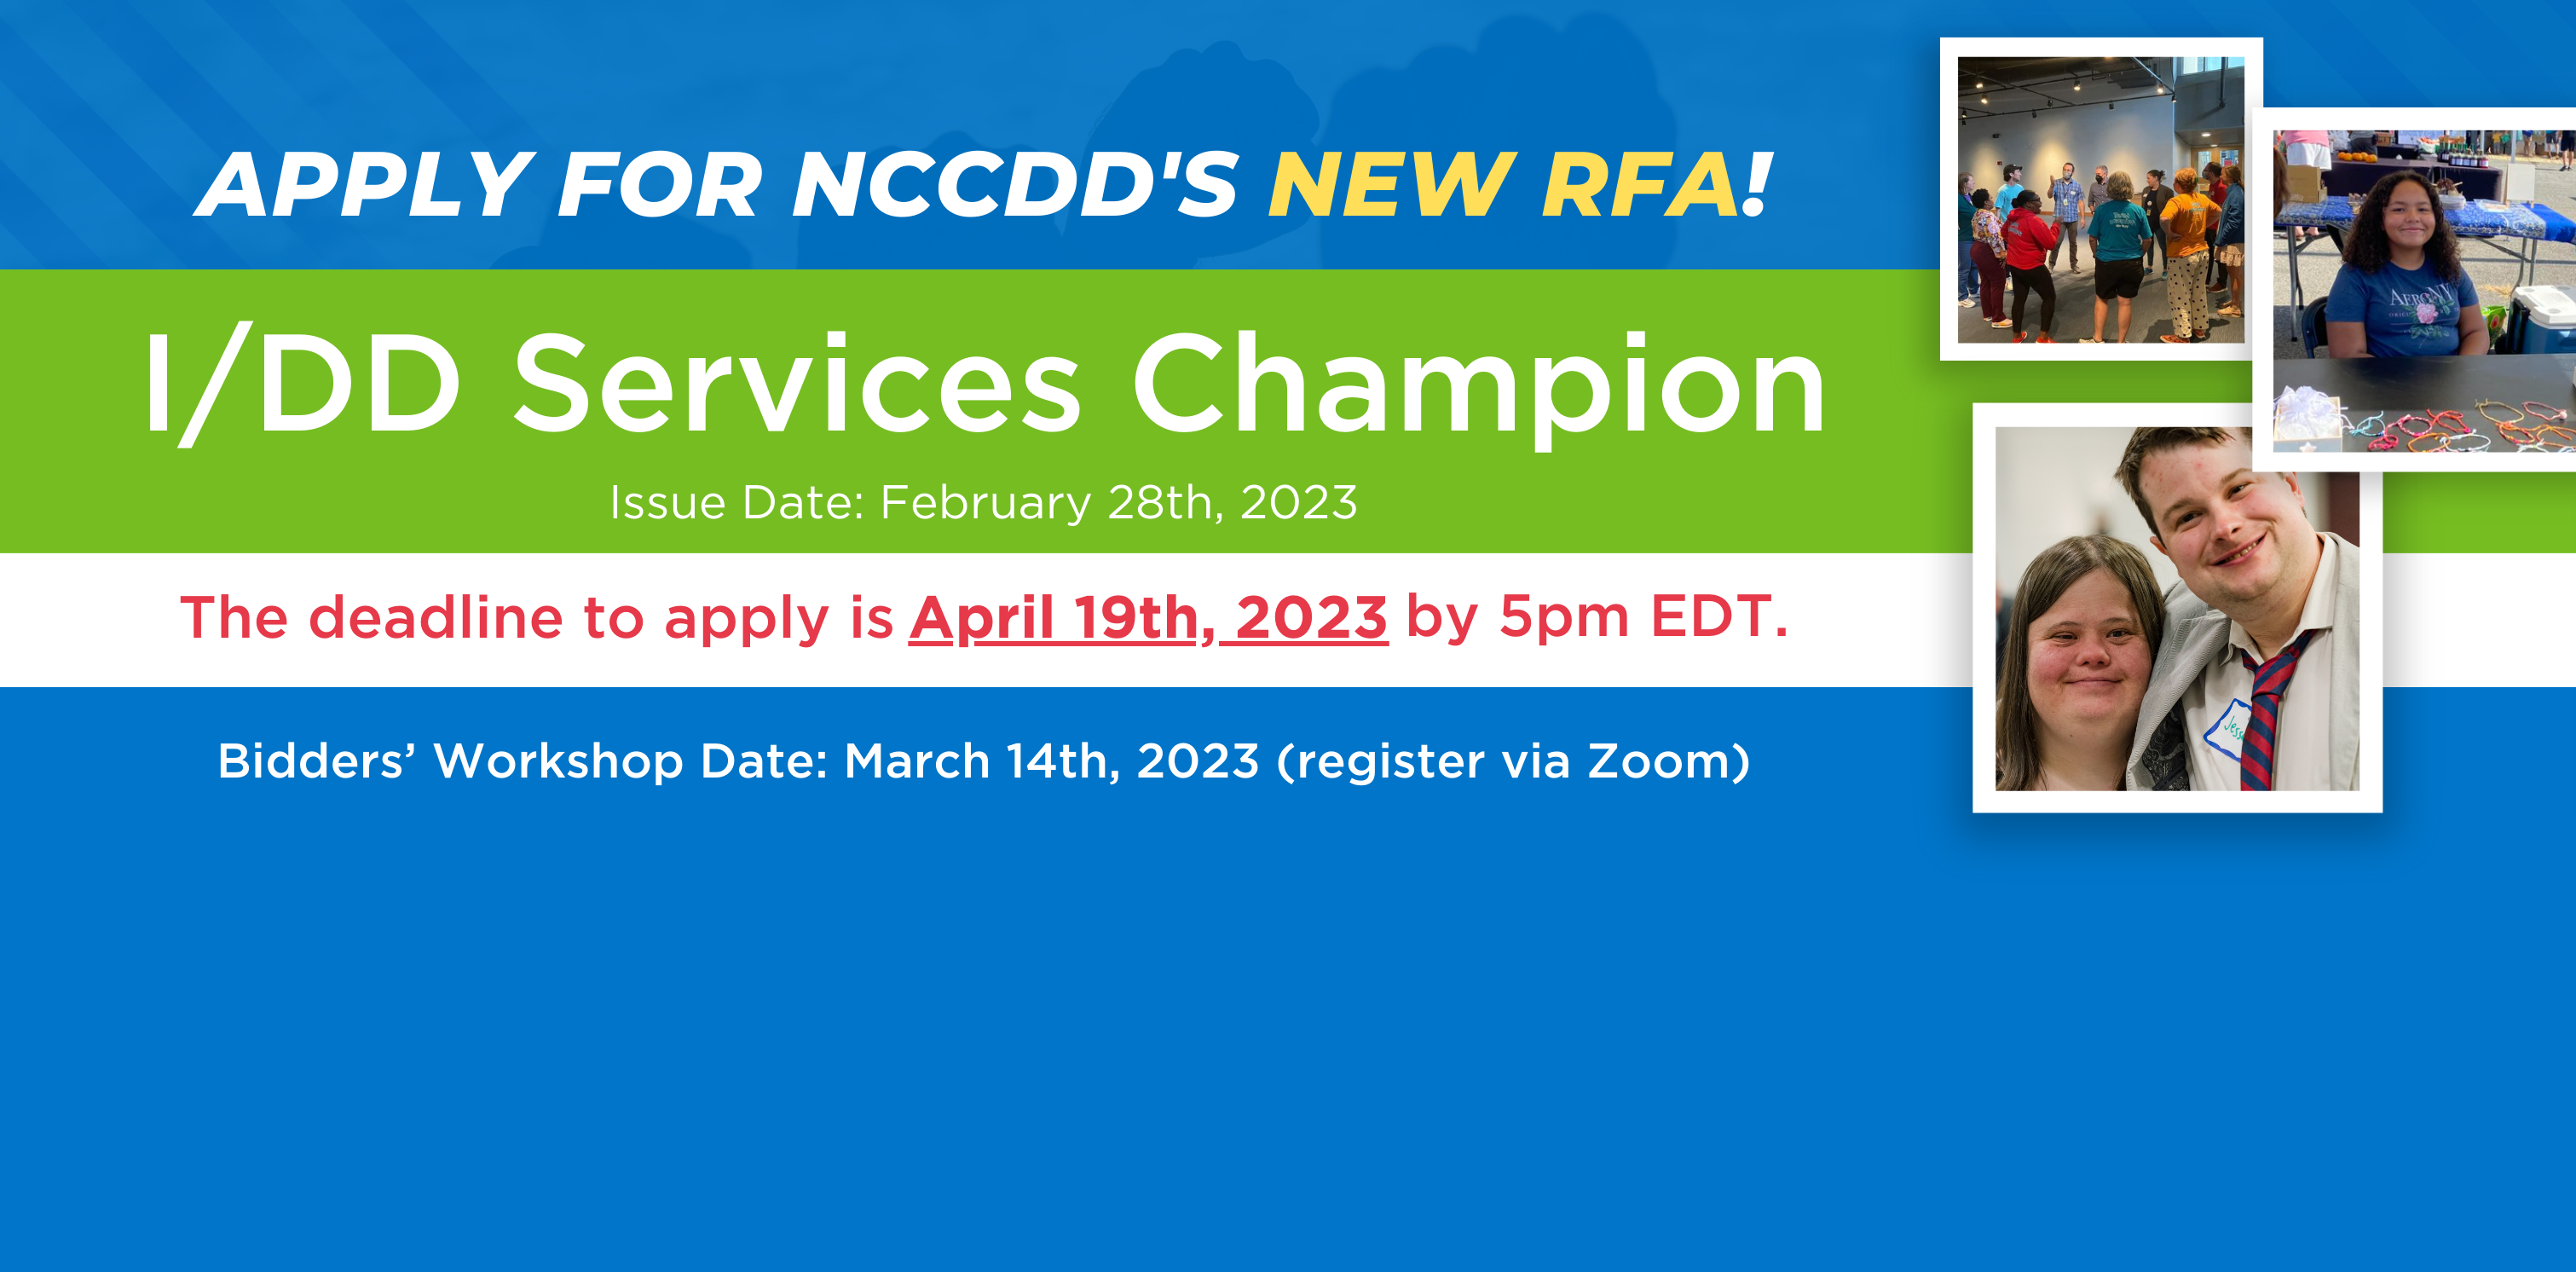 Apply by April 19th, 2023 for NCCDD's New RFA for I/DD Services Champion!